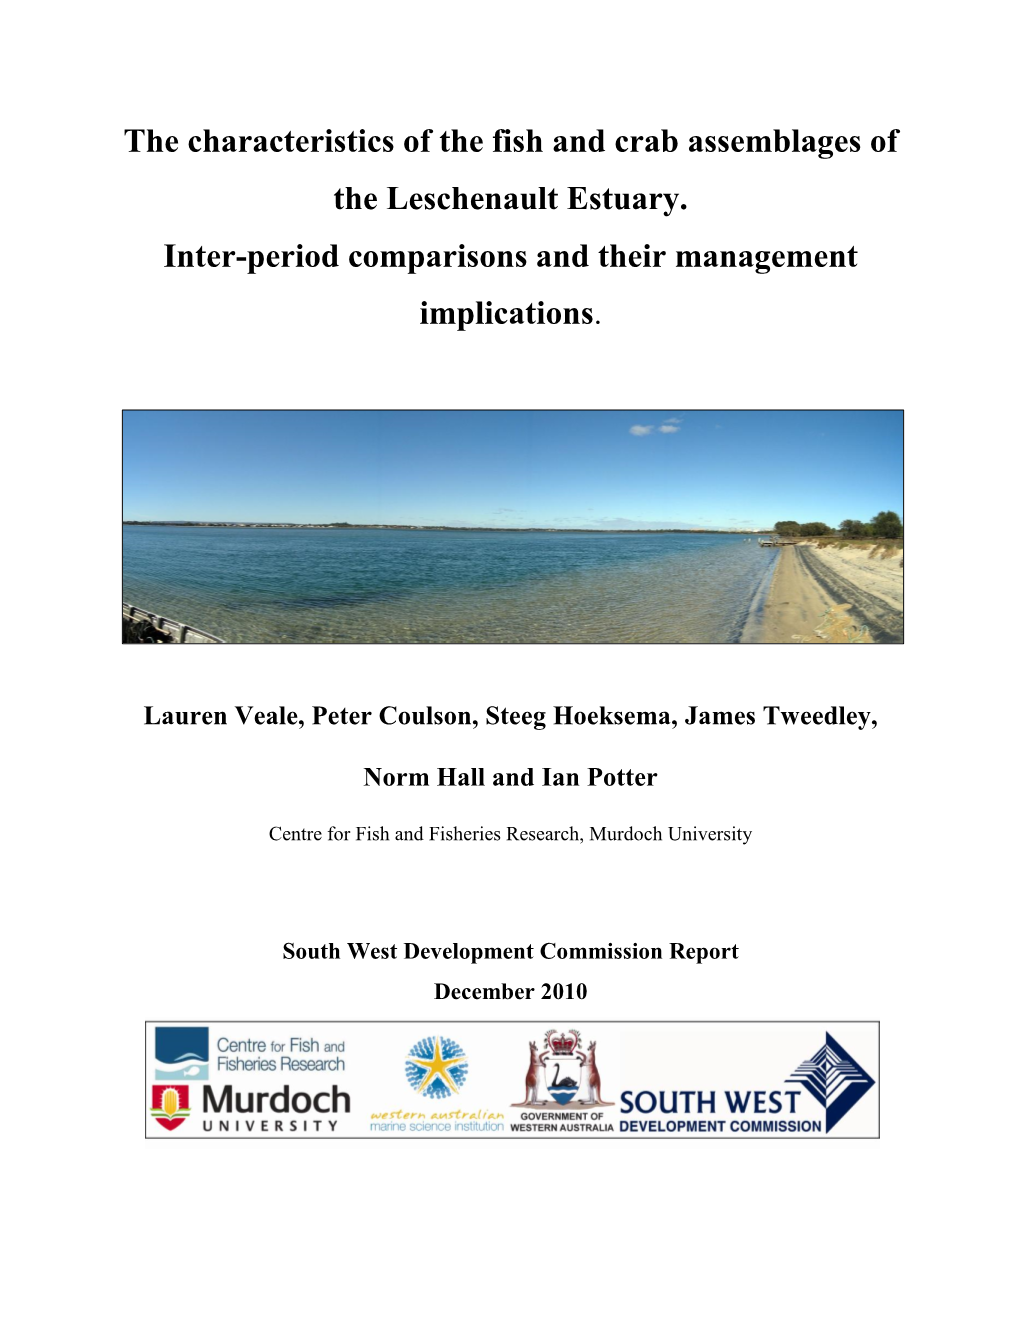 The Characteristics of the Fish and Crab Assemblages of the Leschenault Estuary. Inter-Period Comparisons and Their Management Implications